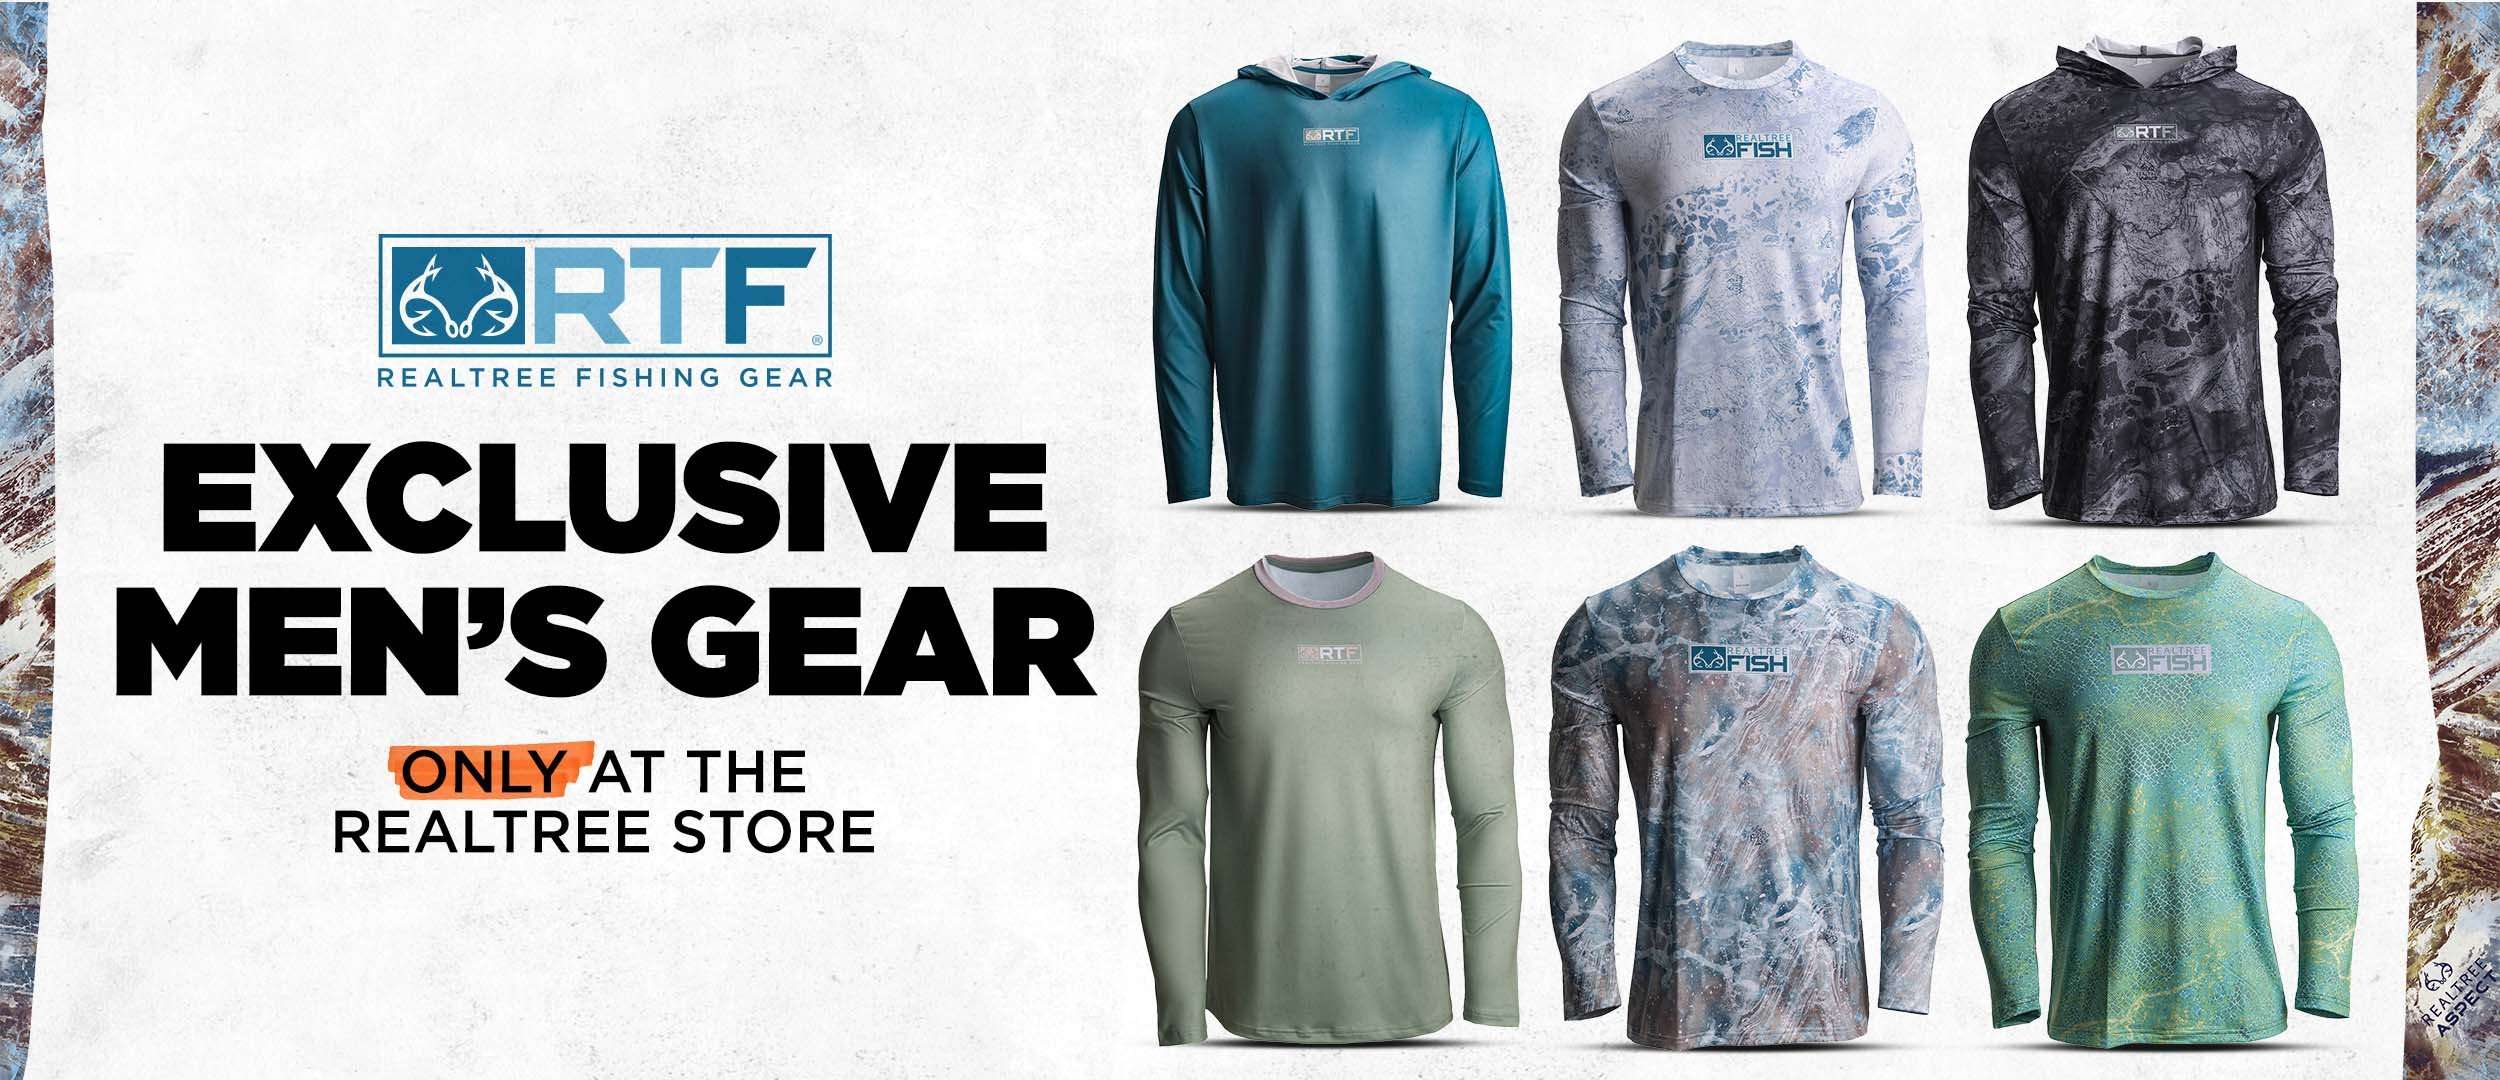 Get your camo and gear fix at the Realtree store.